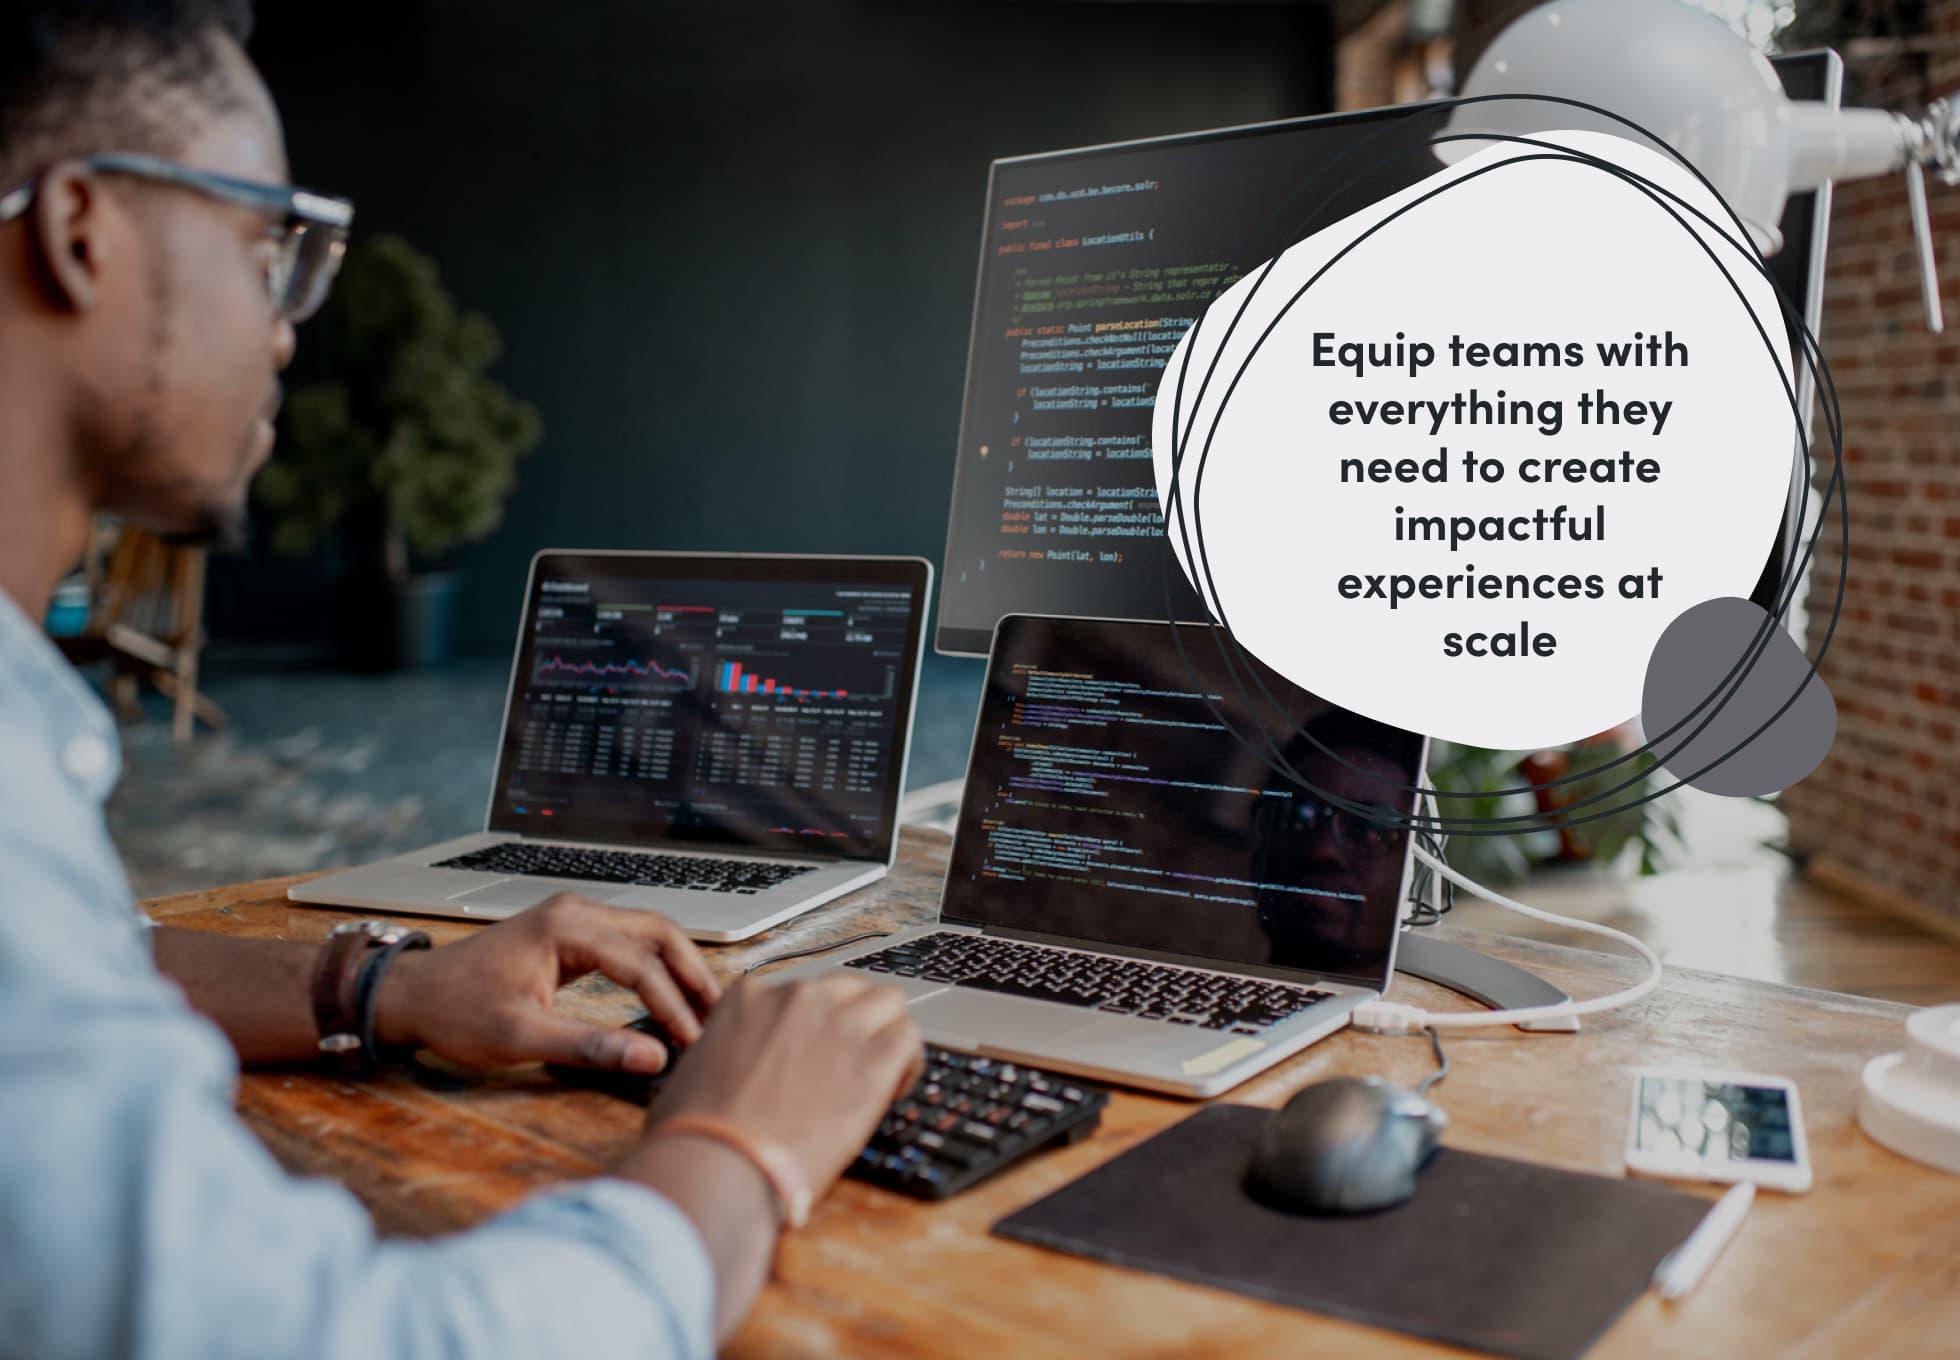 A person working on code on two laptops and a monitor. Overtop this image says "Equip teams with everything they need to create impactful experiences at scale."